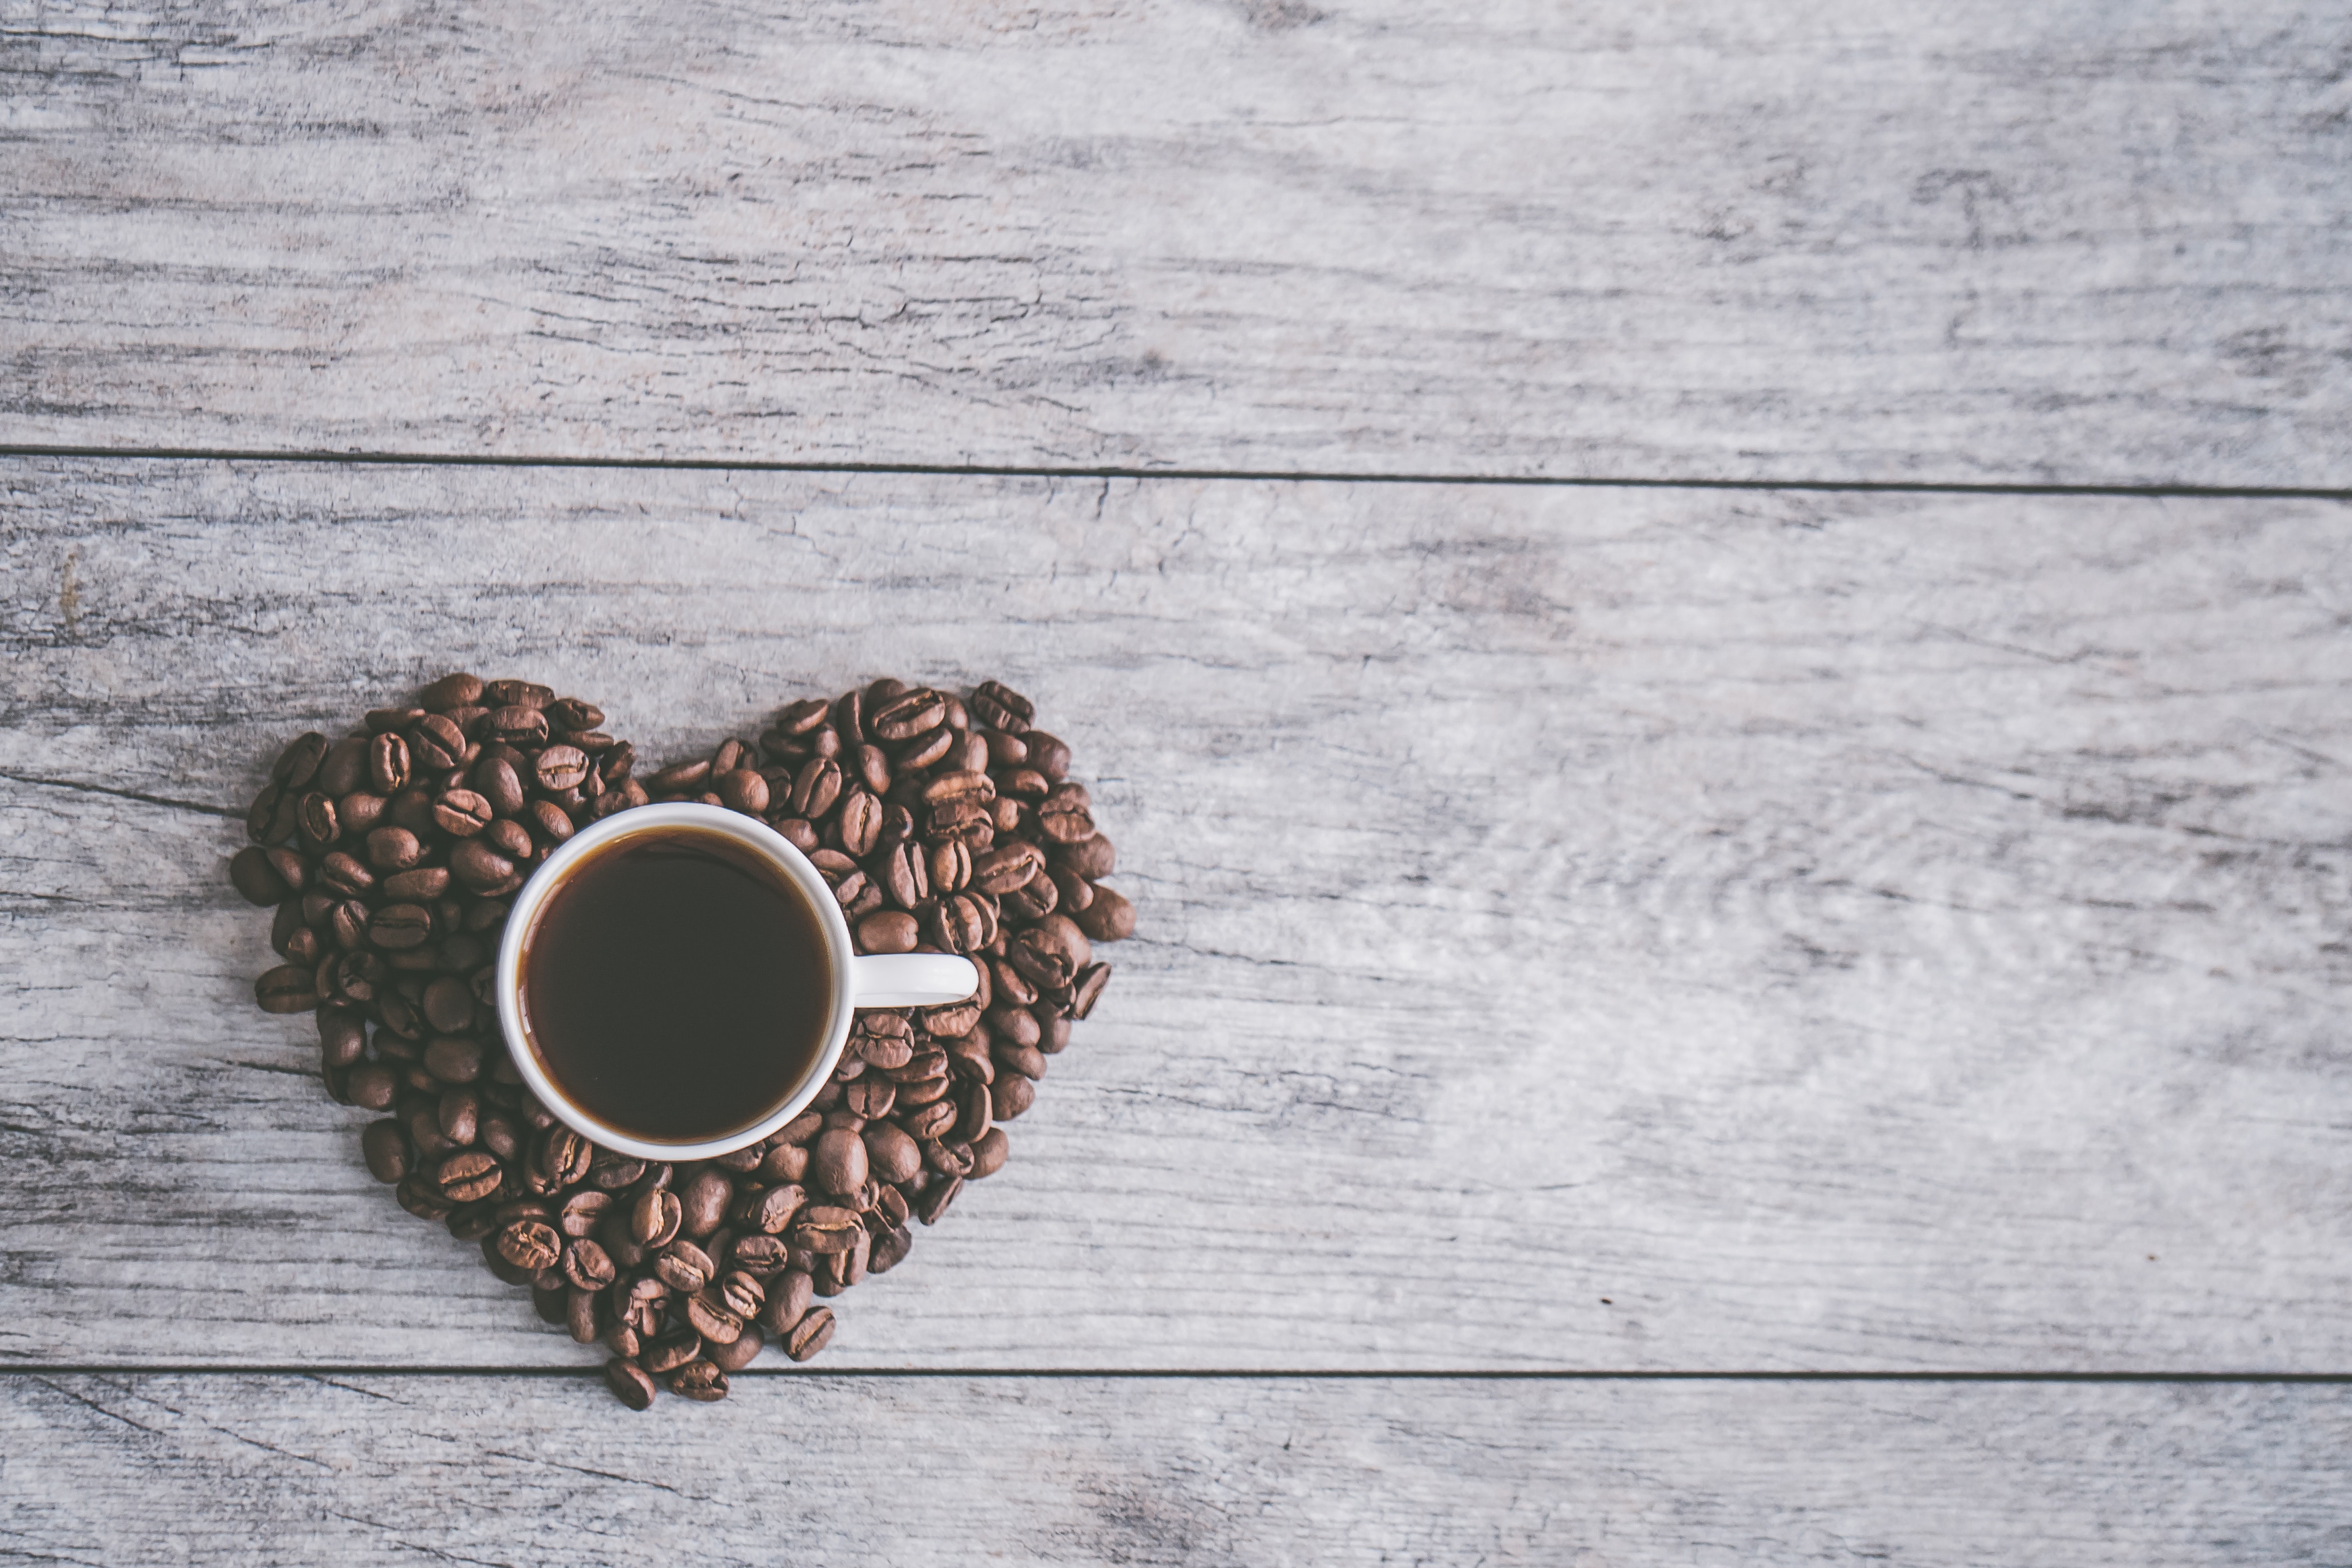 White Ceramic Mug Filled With Brown Liquid on Heart-shaped Coffee Beans, Background, Flatlay, Wood, Texture, HQ Photo